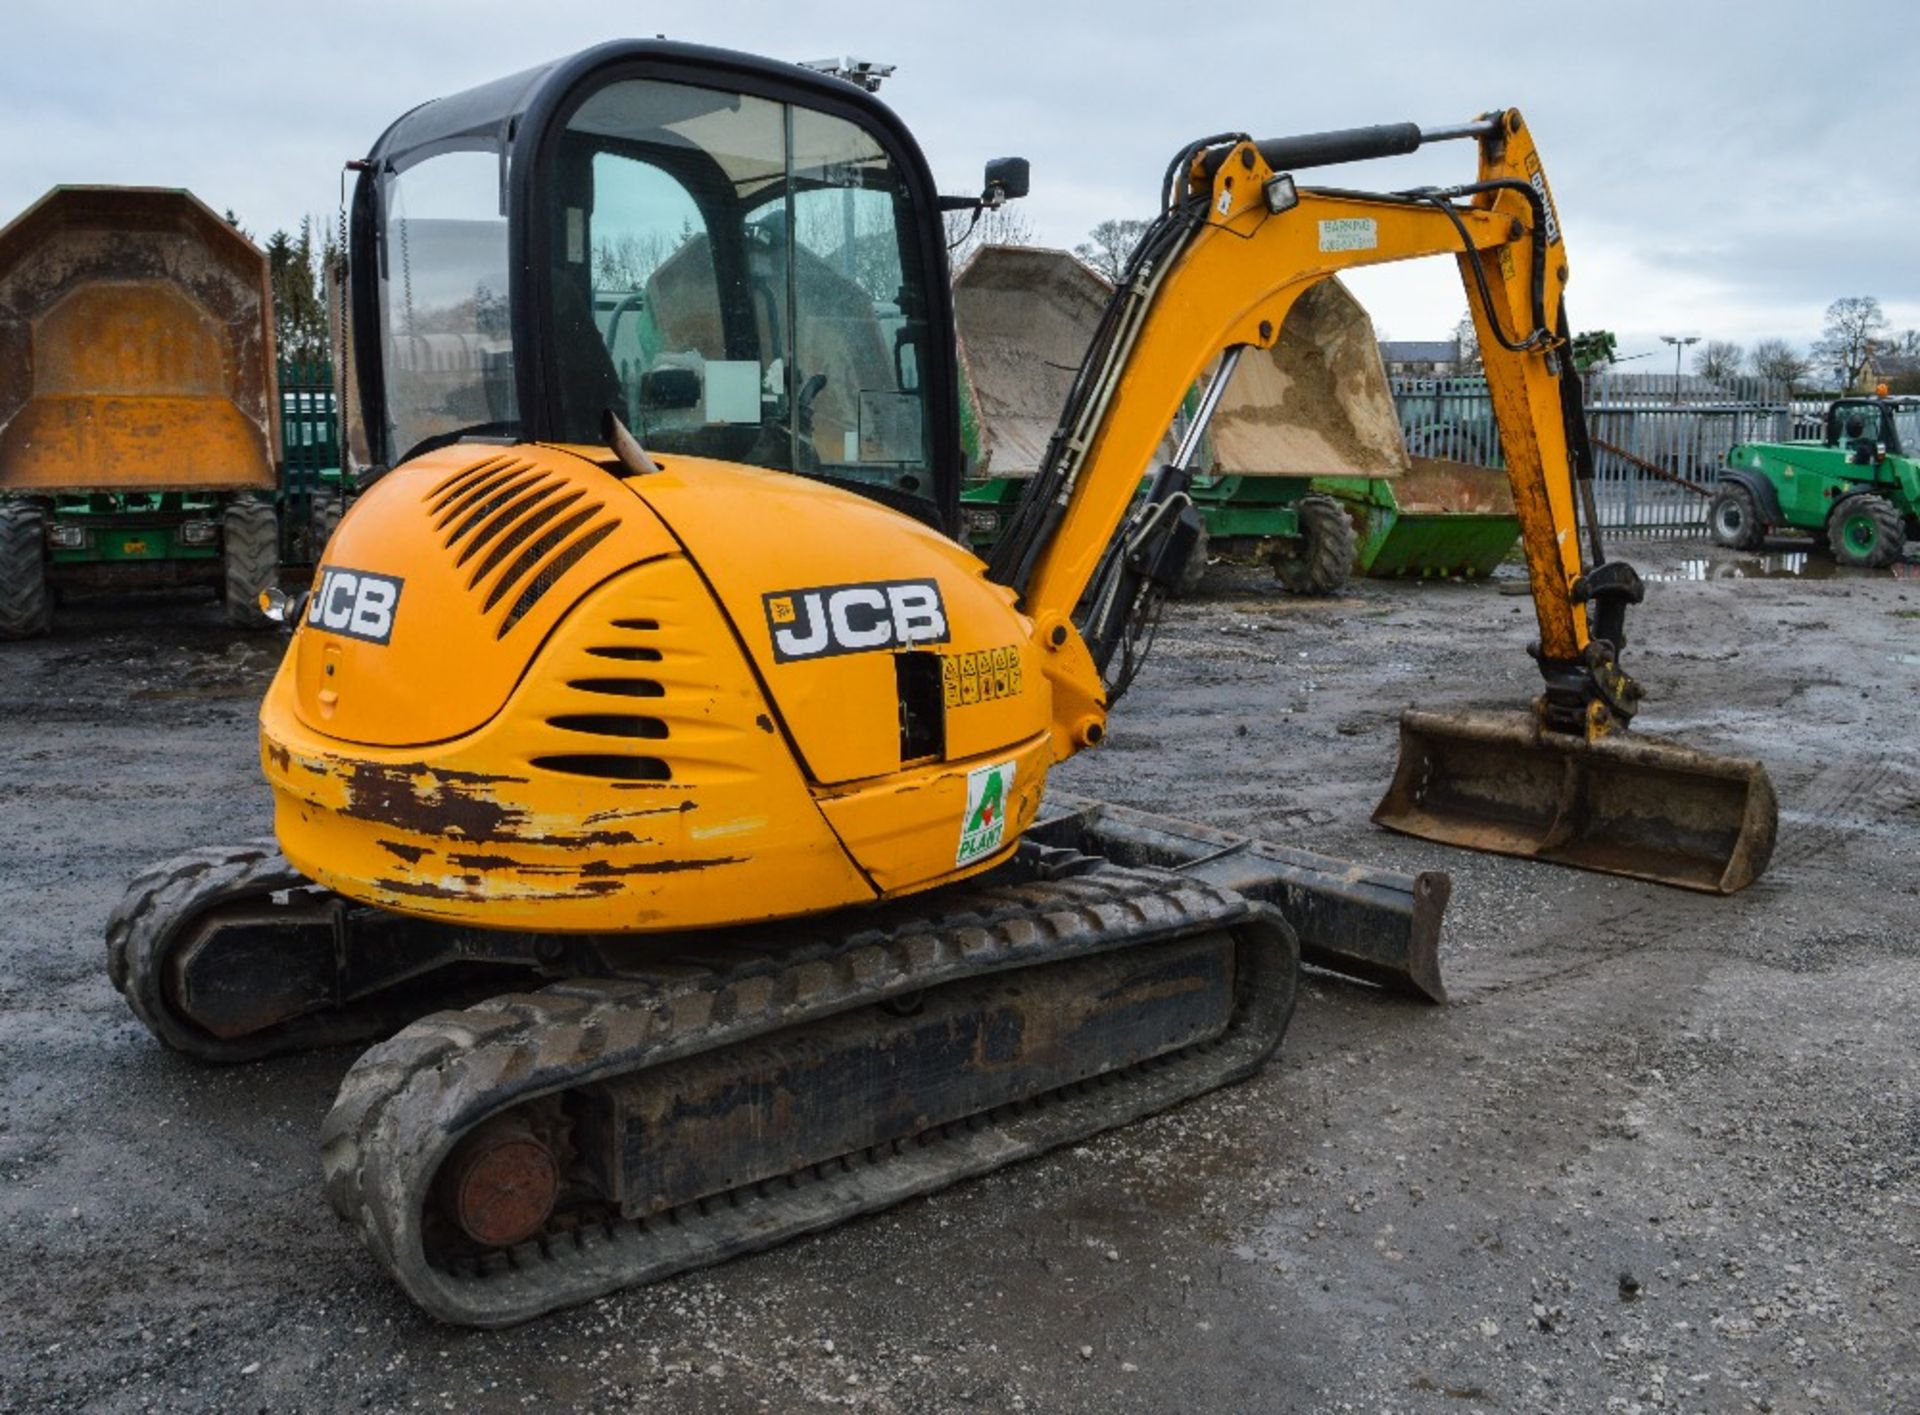 JCB 8050 RTS 5 tonne reduced tail swing rubber tracked mini excavator
Year: 2011
S/N: 1741664 - Image 3 of 12